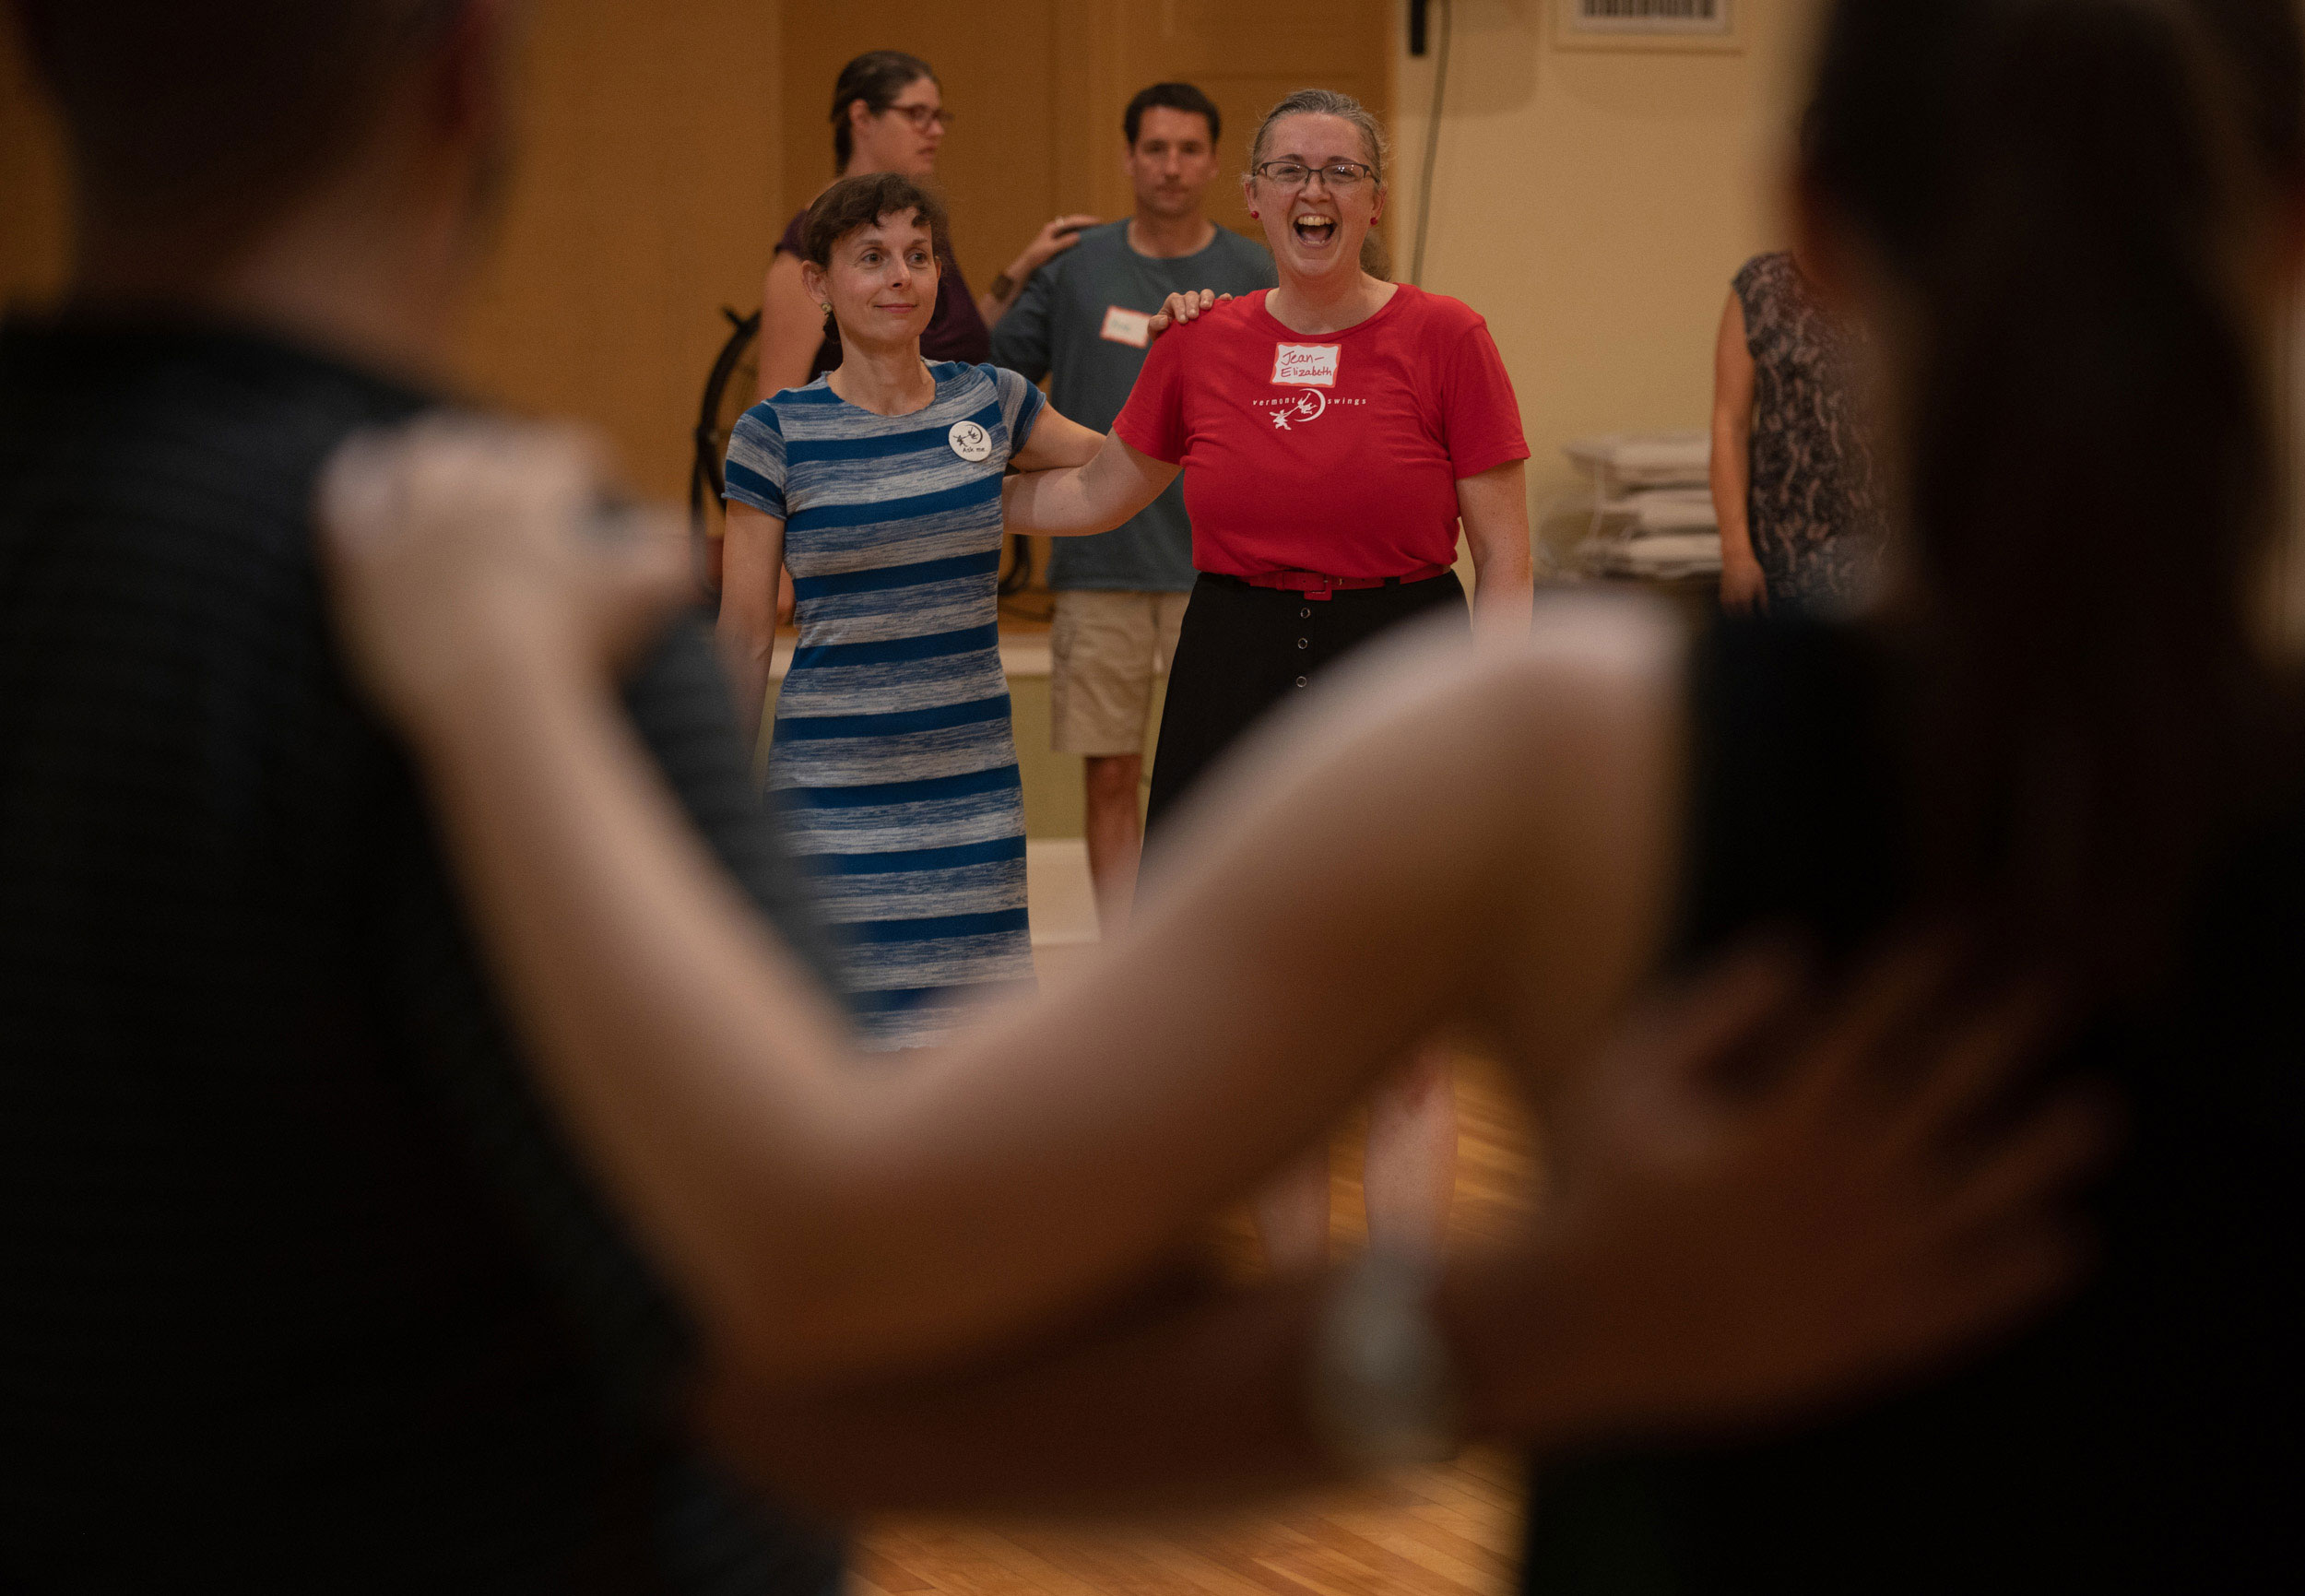 Lisa Pompei and Jean-Elizabeth Shockley lead a swing dance class at the Champlain Club in Burlington, Vermont, on June 20, 2021.